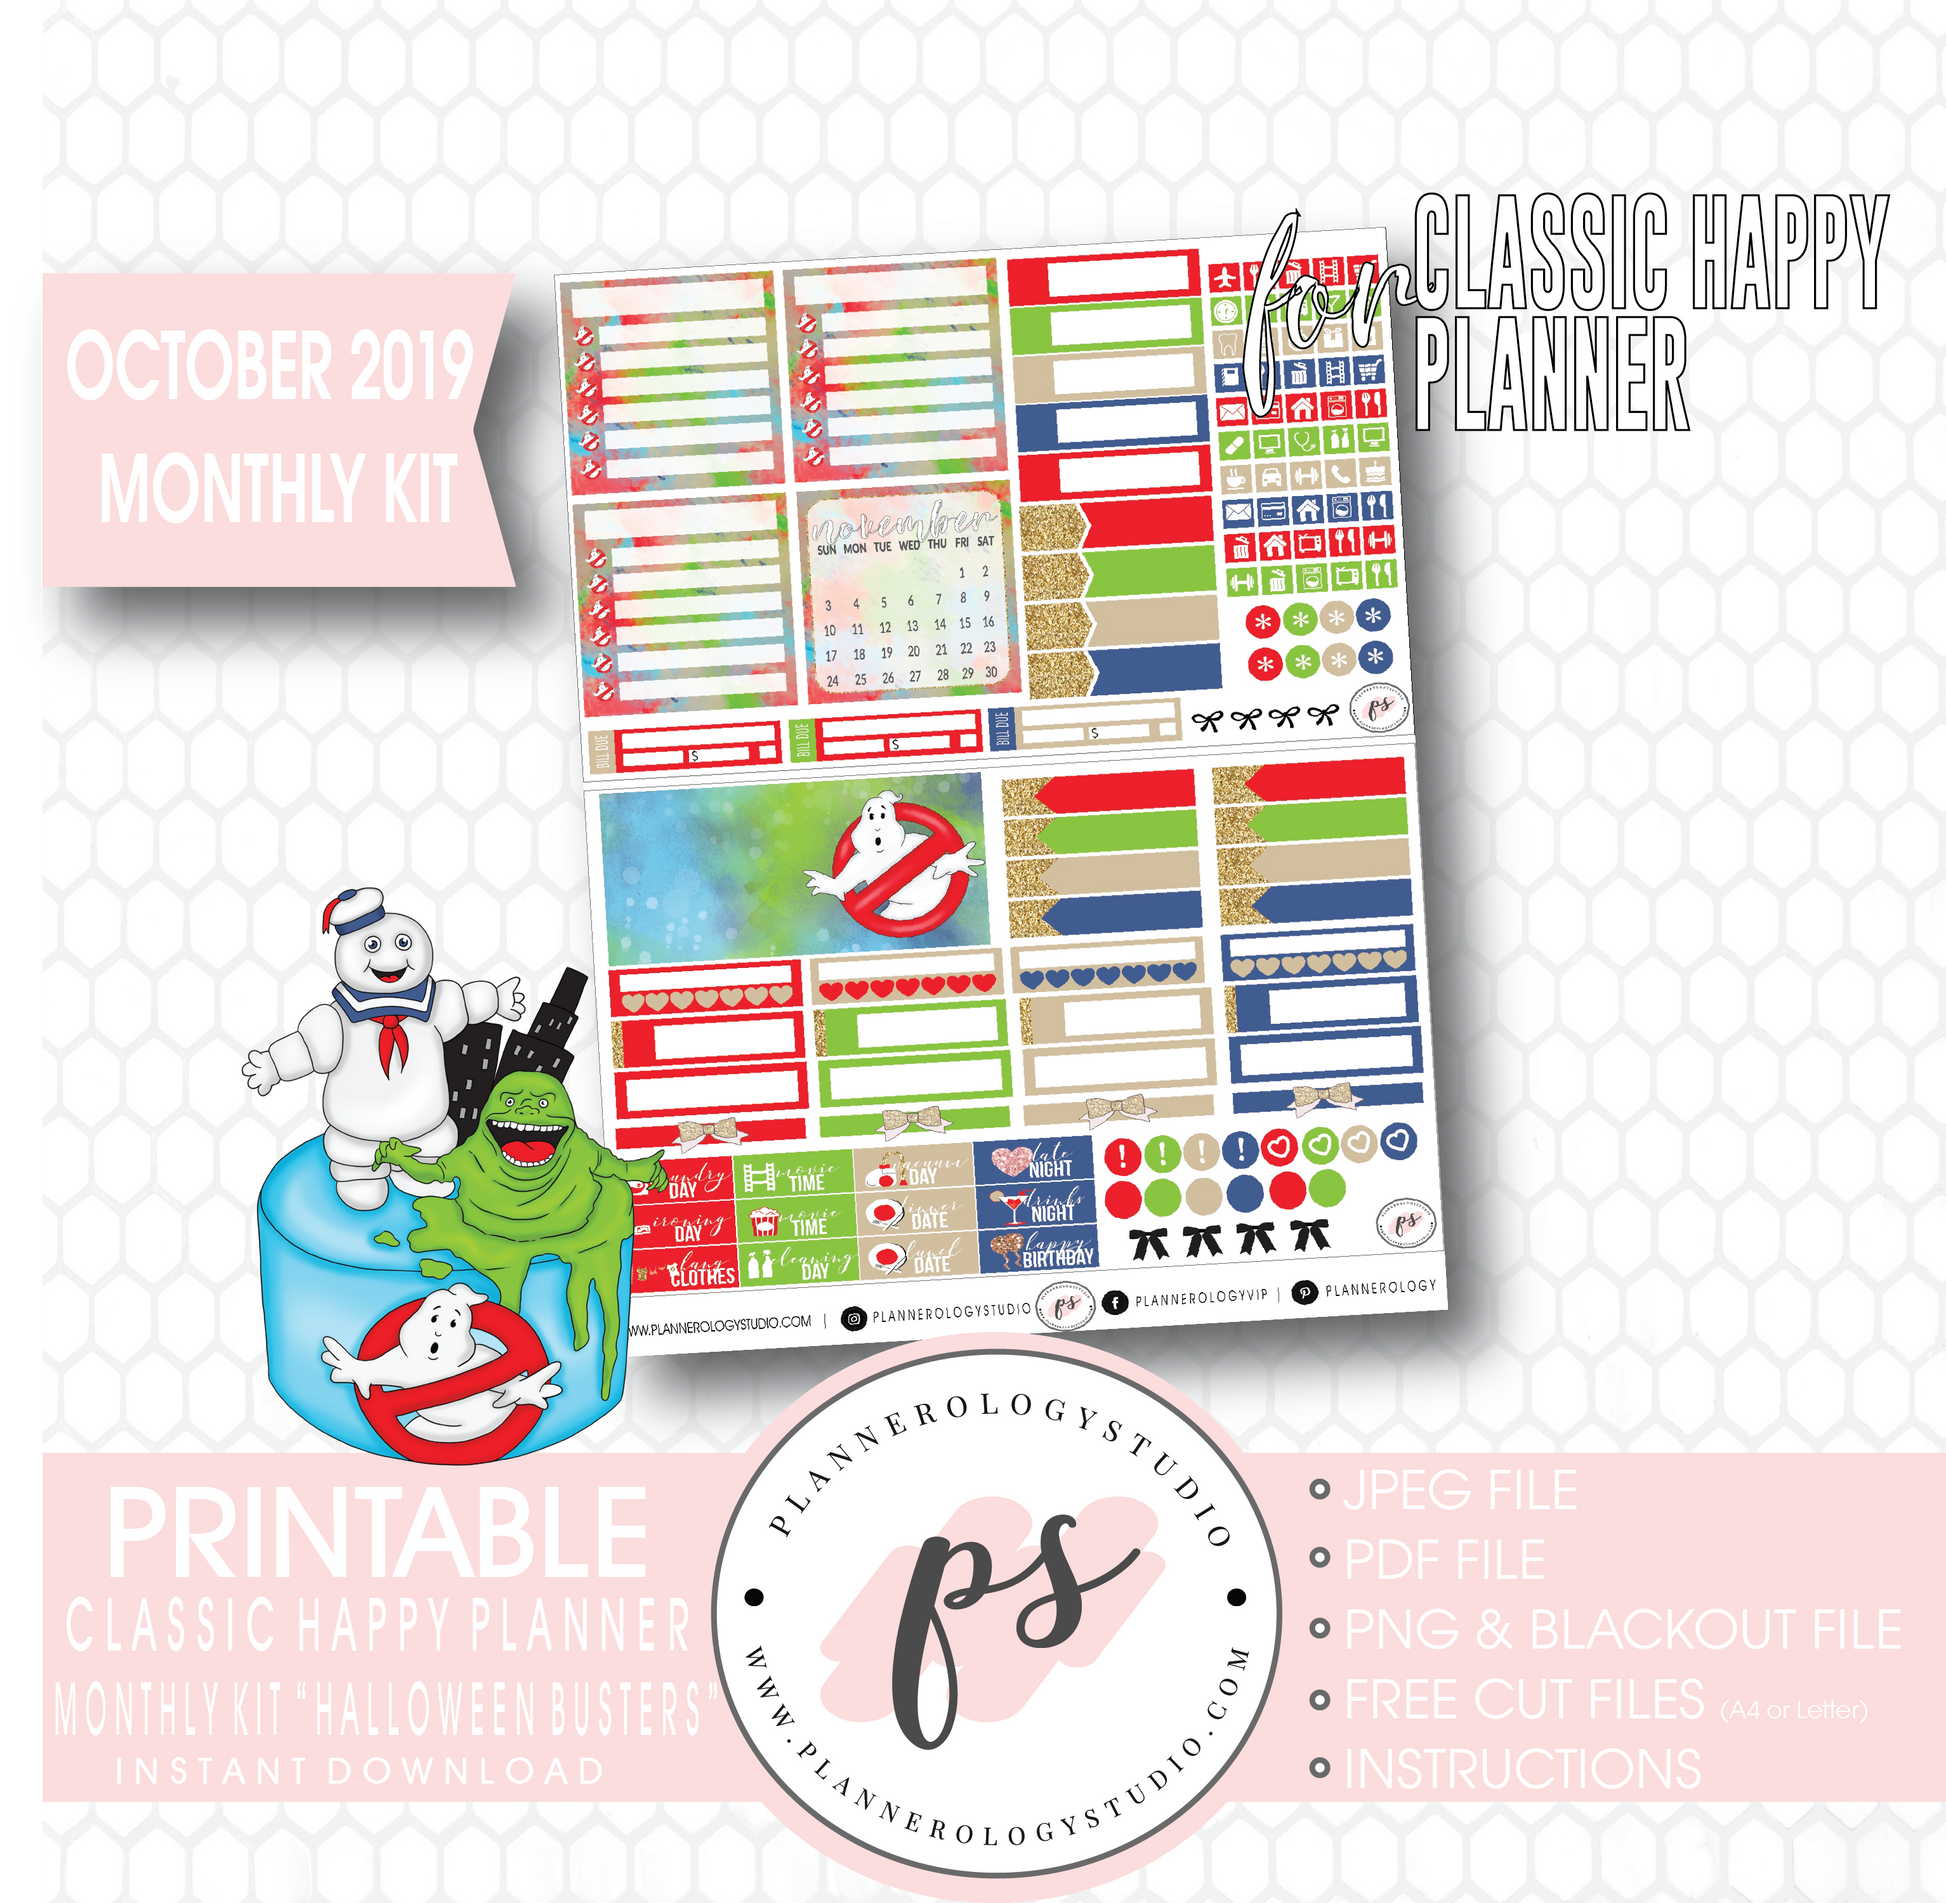 Halloween Busters October 2019 Monthly View Kit Printable Planner Stickers (for use with Classic Happy Planner) - Plannerologystudio